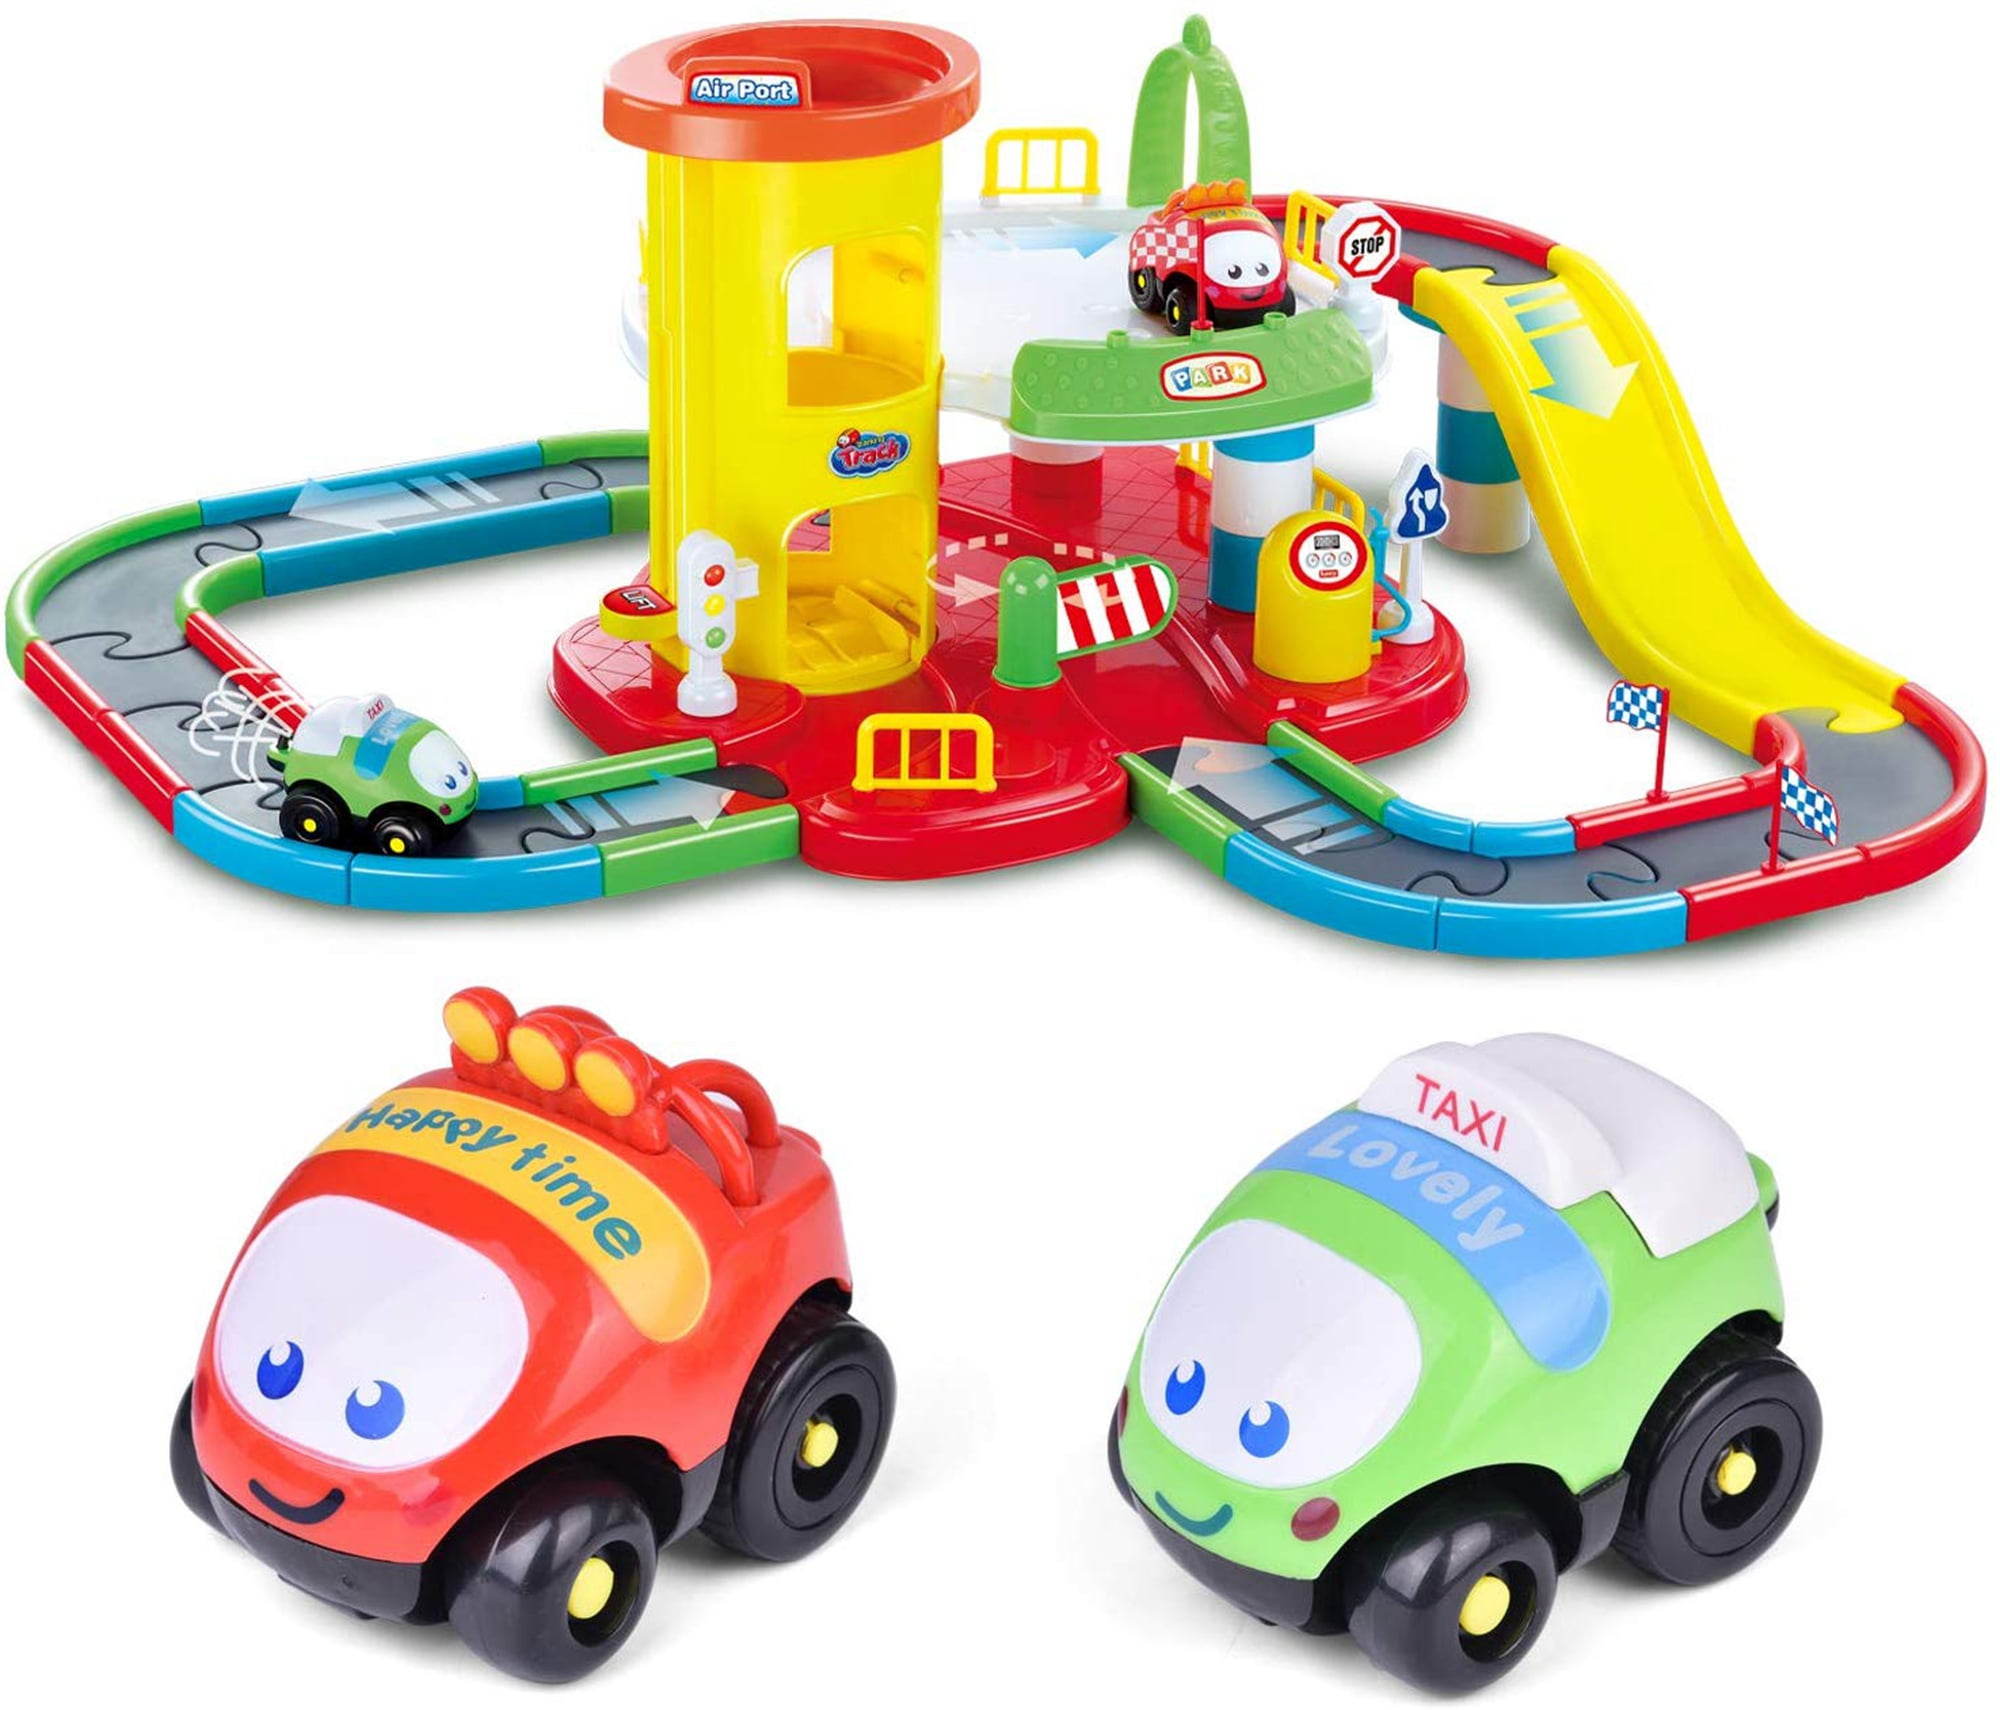 Toy Garage Playset for Toddlers, Race Track Elevator Cars, Stem